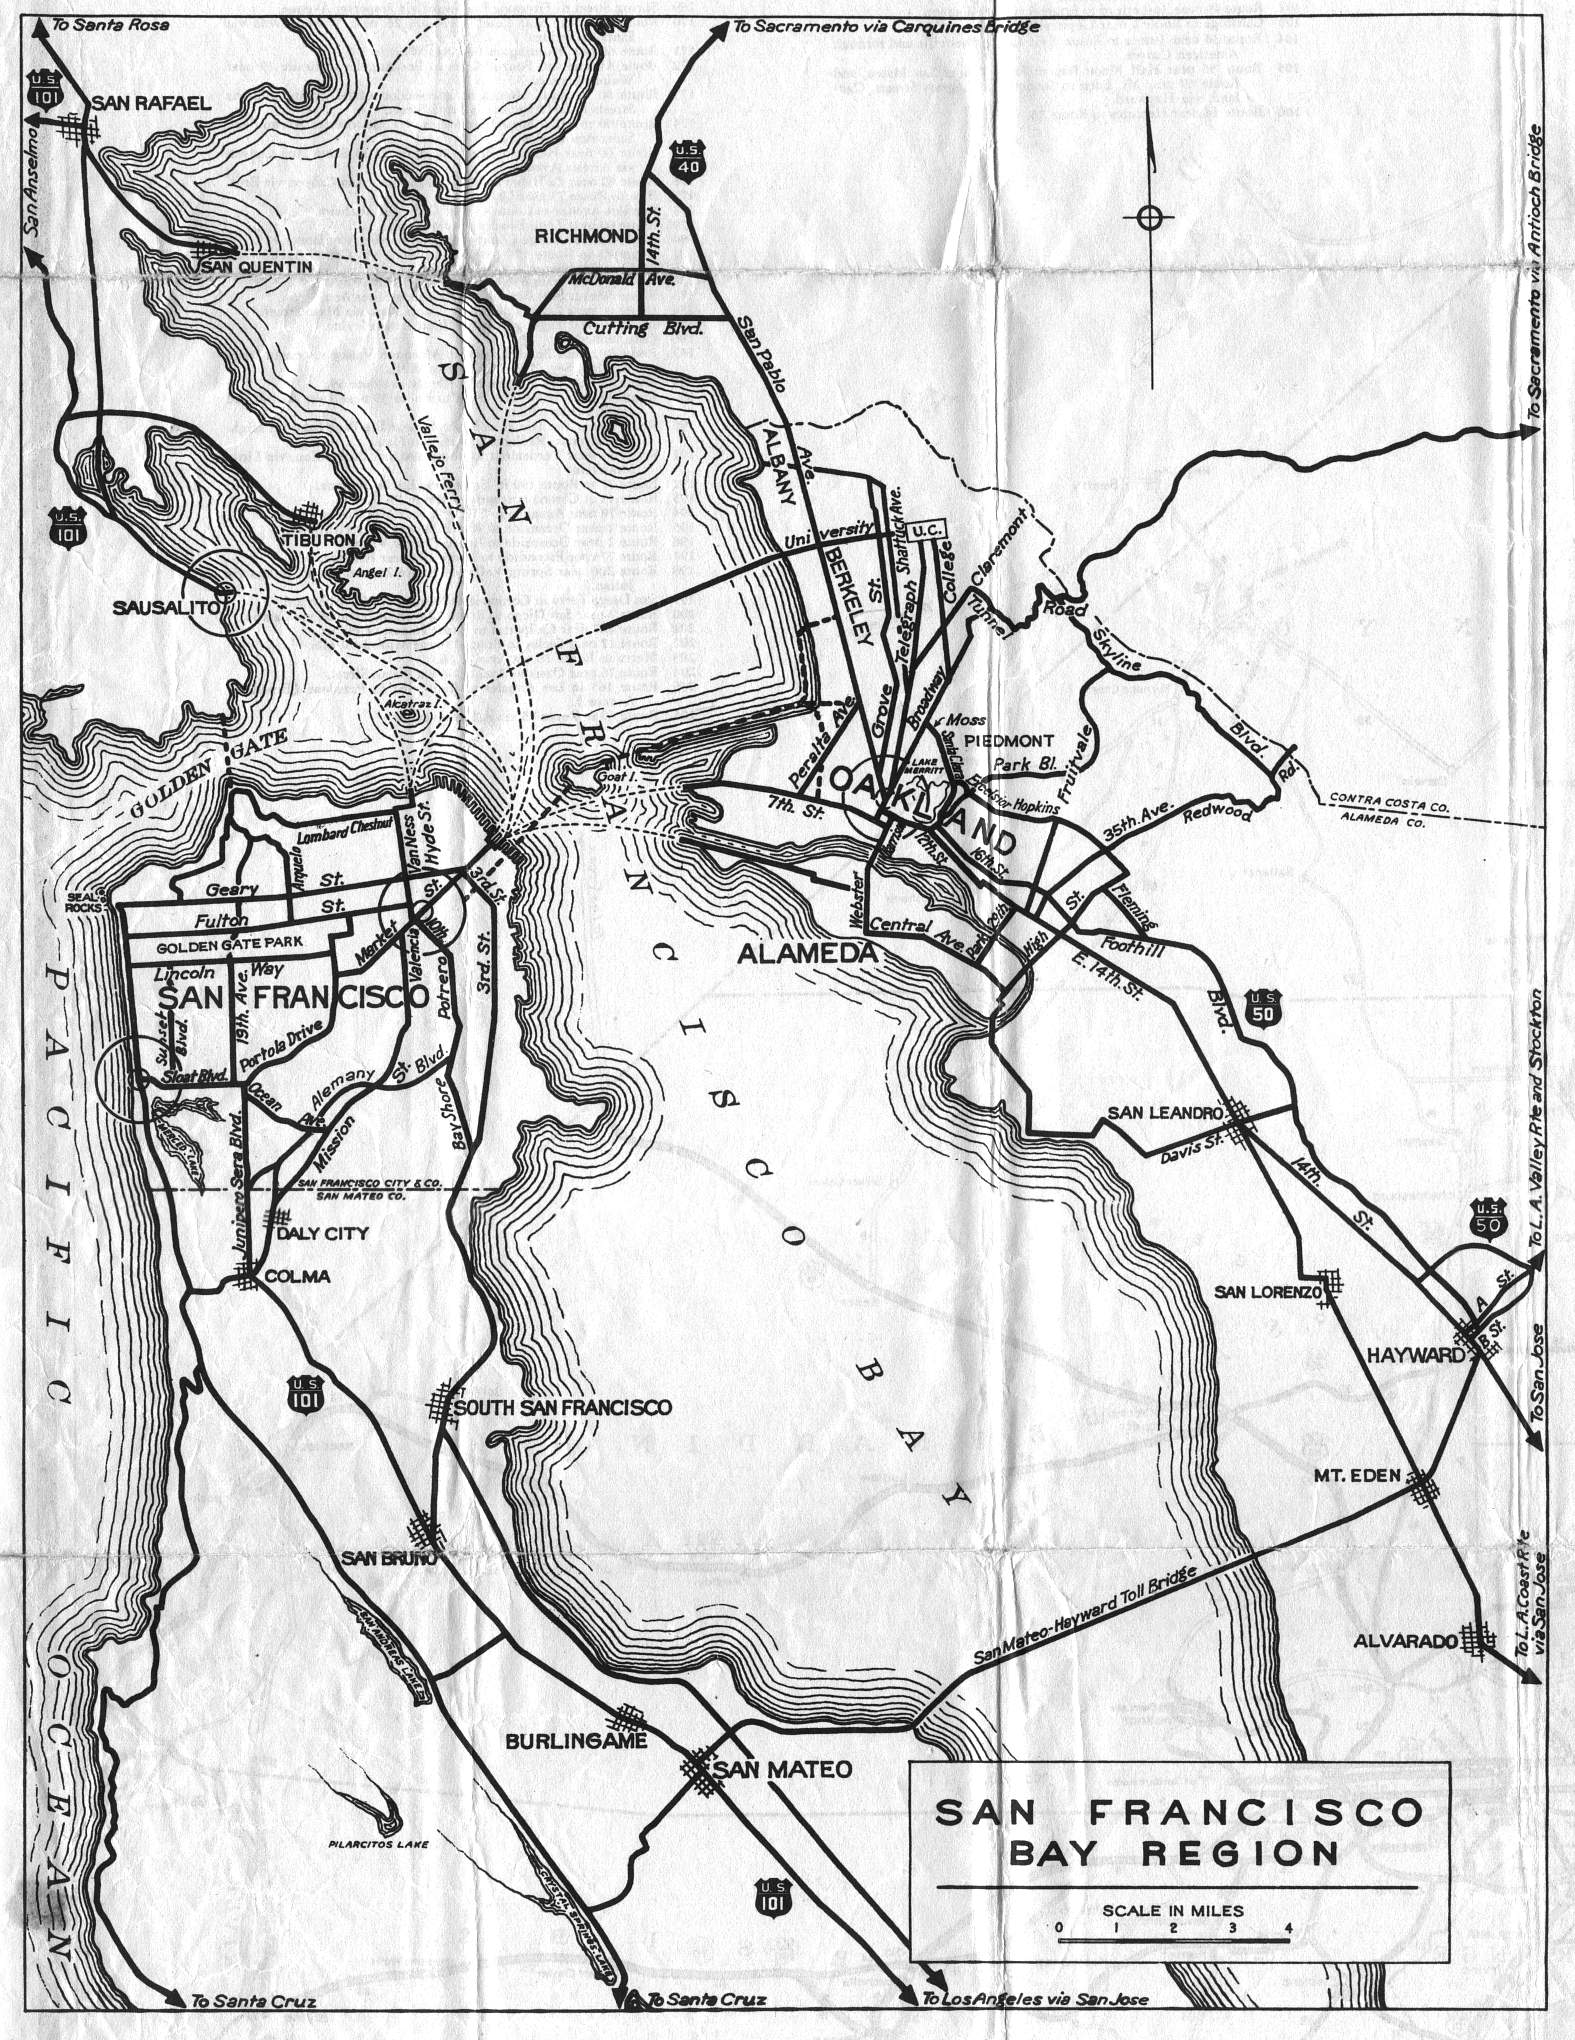 Detail map for the San Francisco Bay Area on the 1936 California official highway map